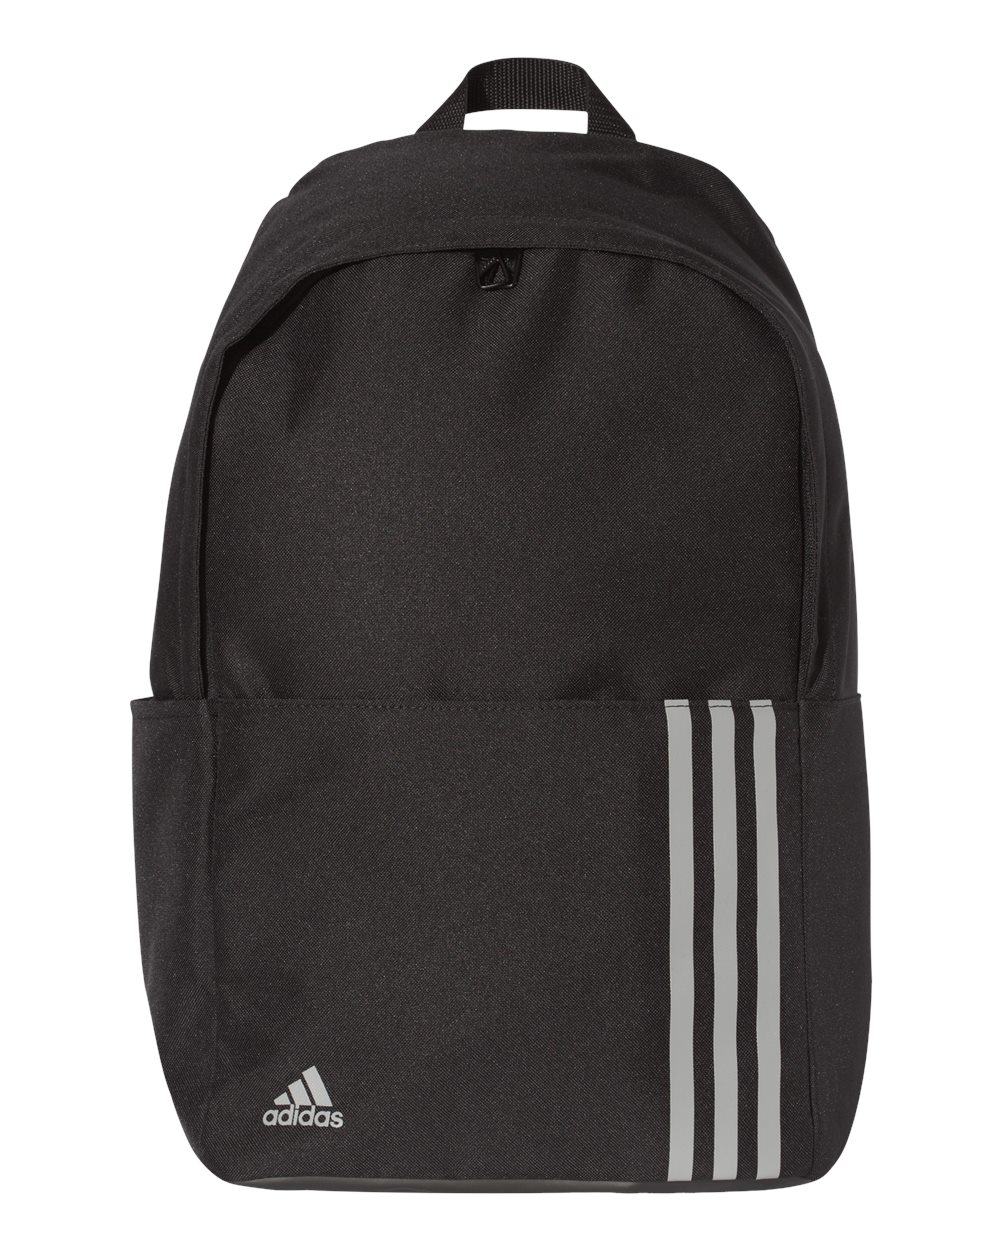 Adidas A301 - 18L 3-Stripes Small Backpack